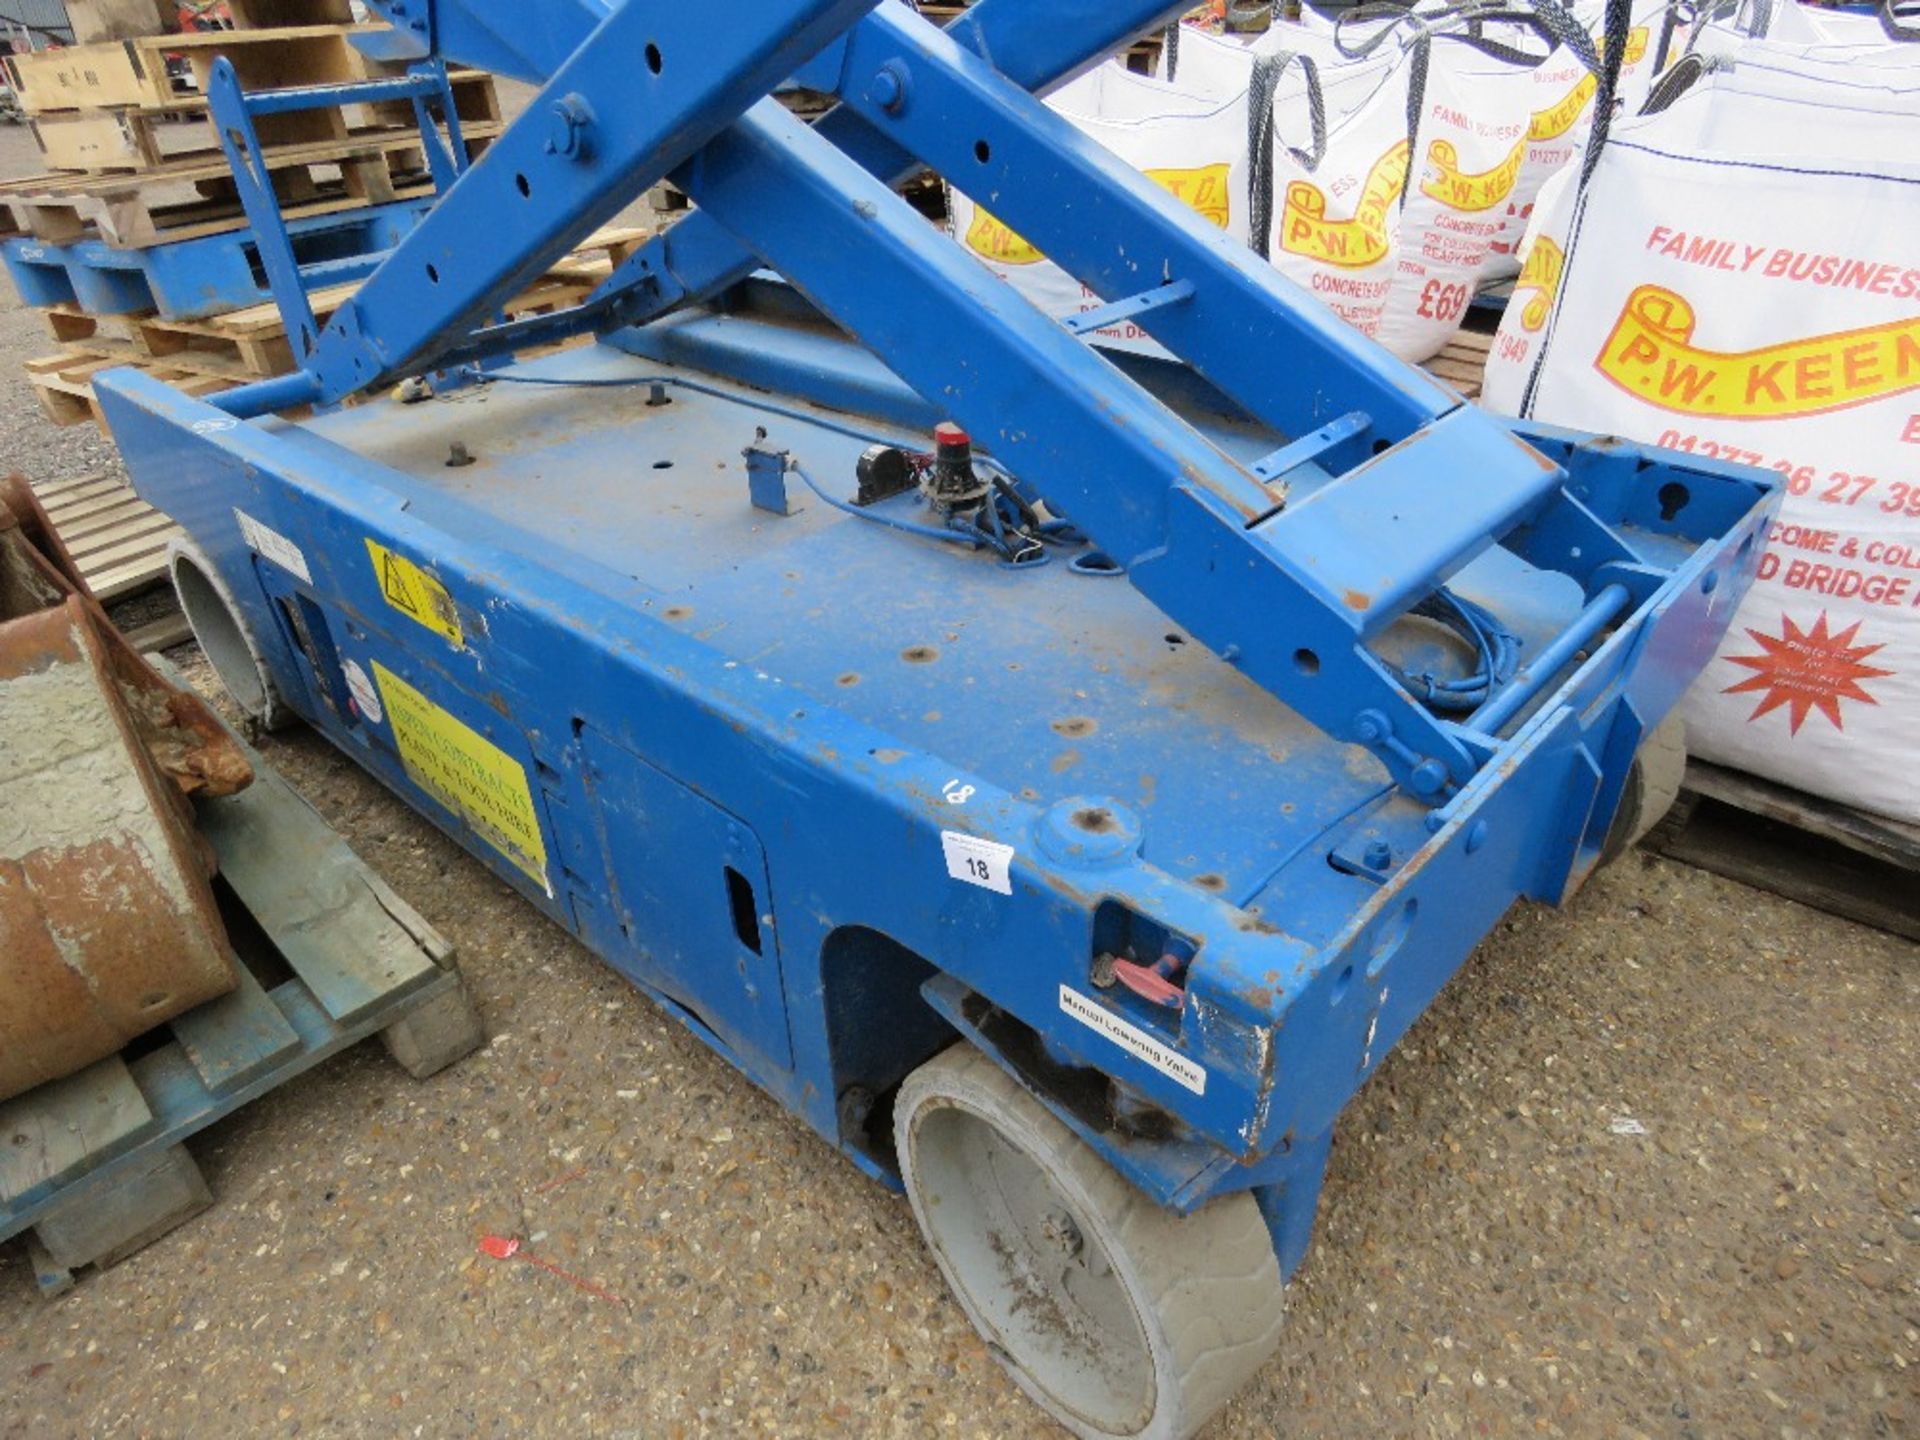 GENIE 2646 BATTERY POWERED SCISSOR ACCESS LIFT. YEAR 2006. DIRECT FROM CONTRACTOR WHO IS DOWNSIZING. - Image 2 of 6